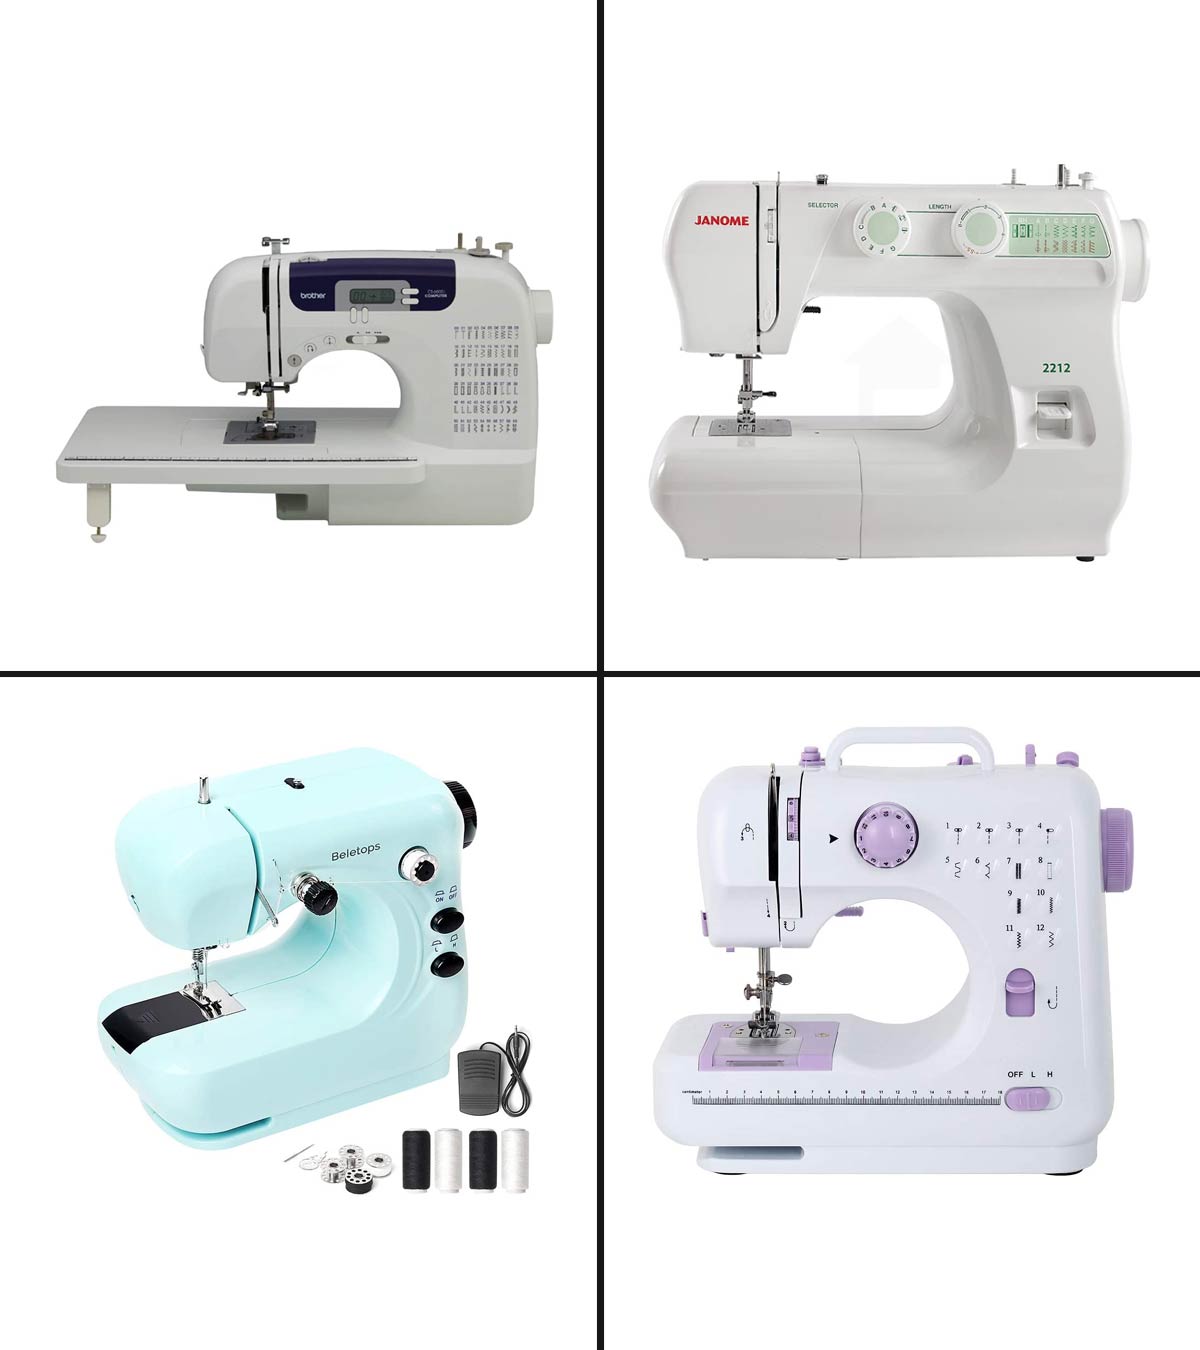 Portable Handheld Sewing Machine, Electric Crafting Mending Mini Sewing Machines, 12 Stitches 2 Speed with Foot Pedal, for Kids Beginners, Size: 12.20